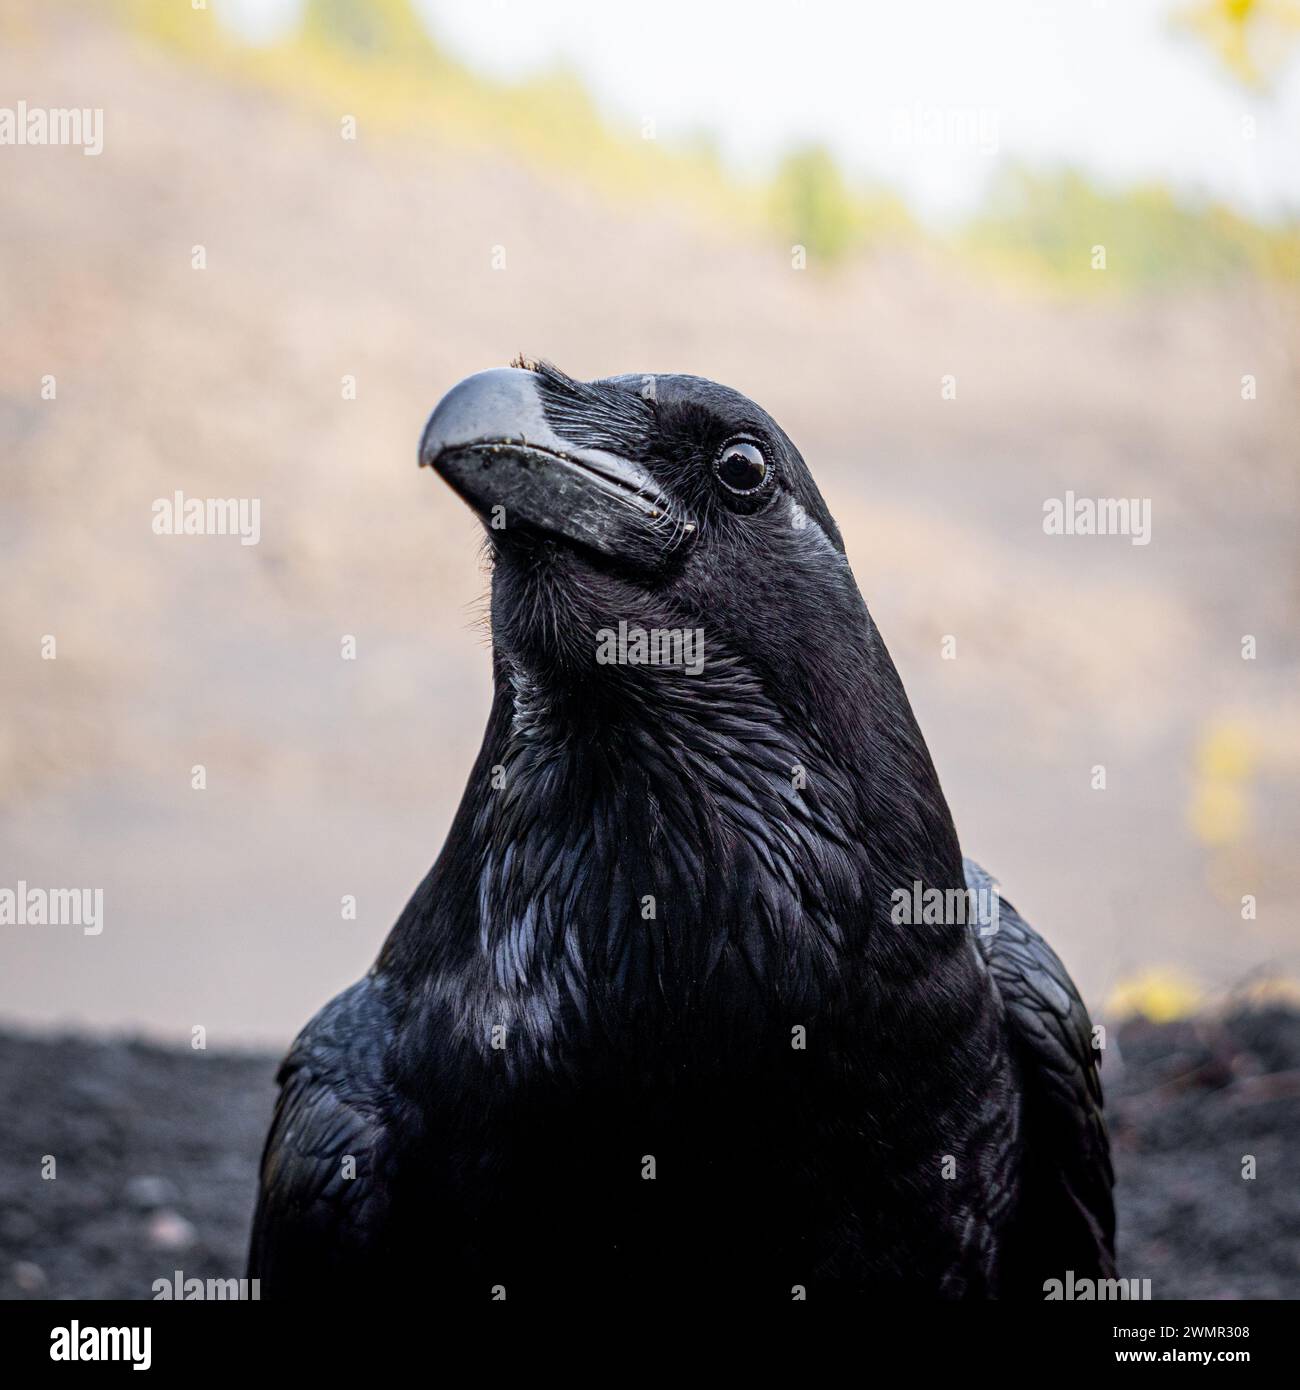 close up view of the head of a crow Stock Photo